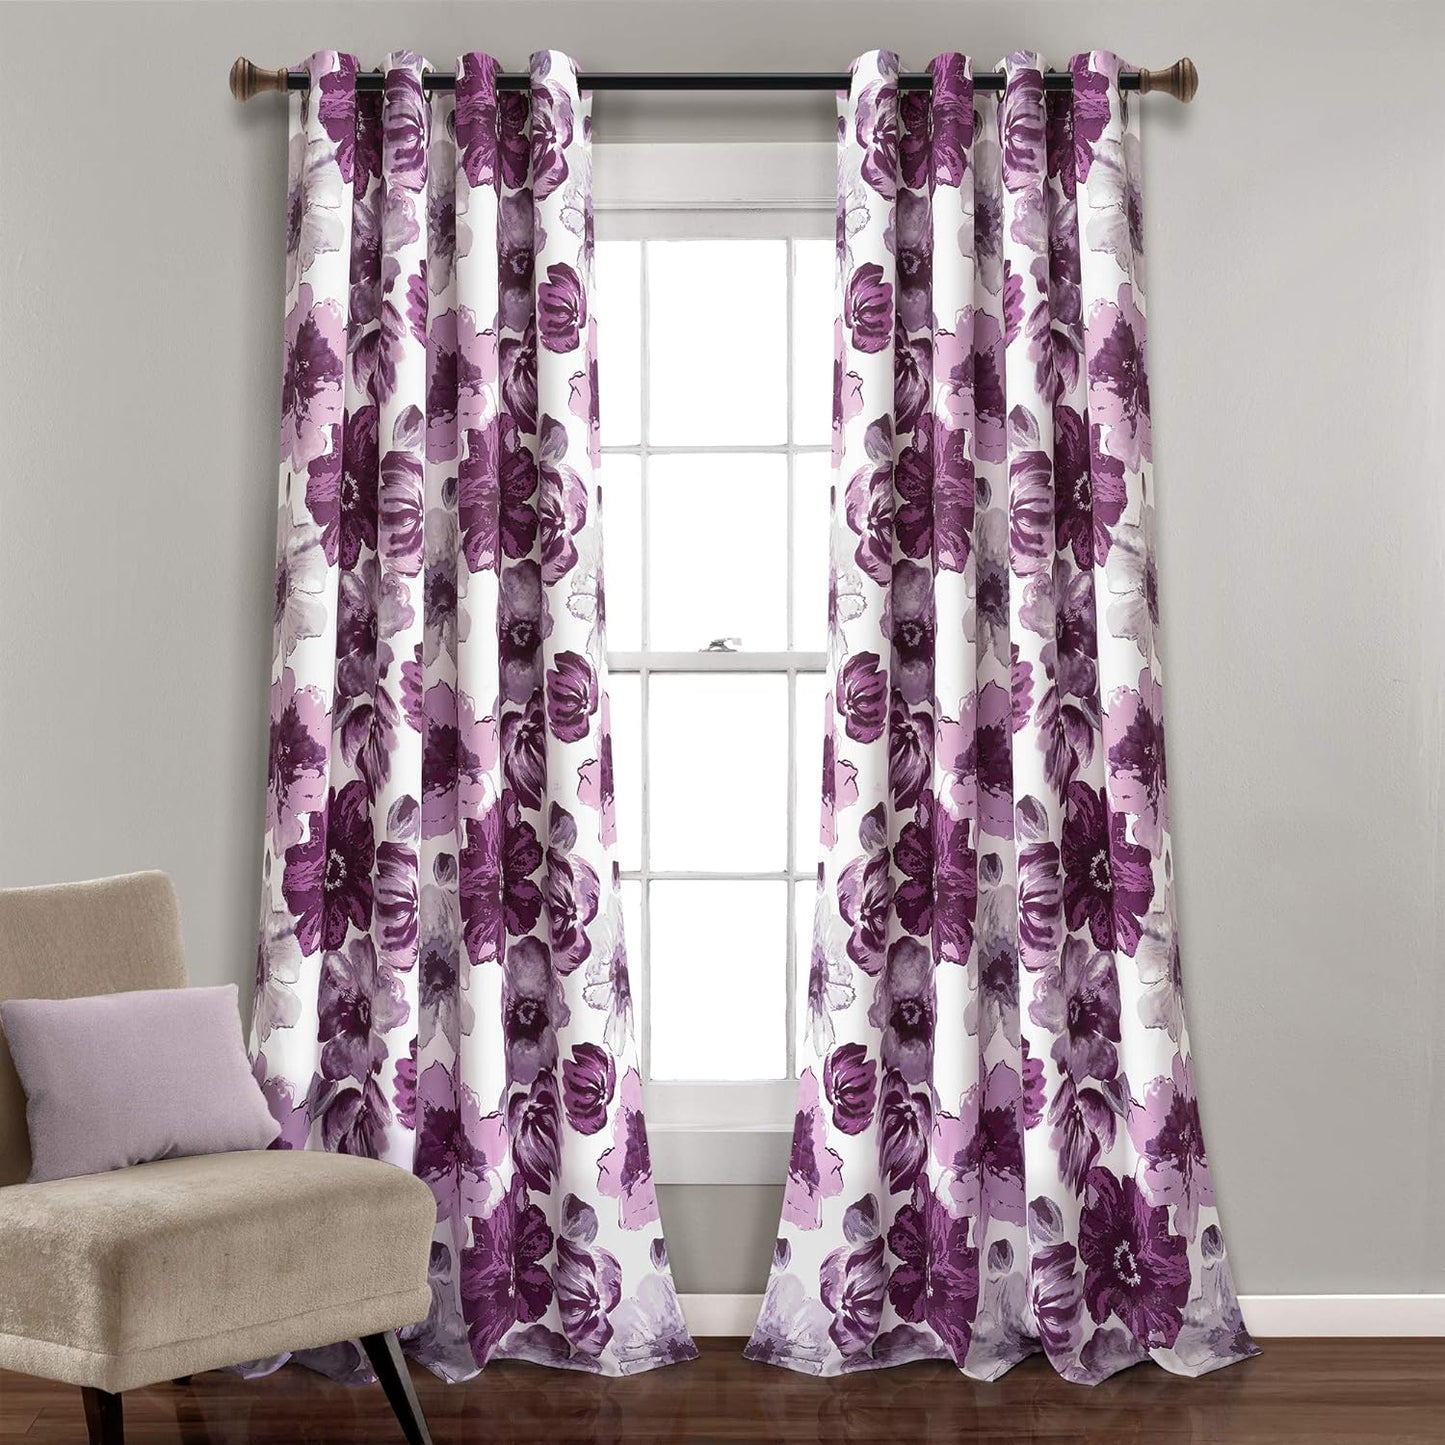 Leah Light Filtering Window Curtain Panel Pair Floral Insulated Grommet, 52"W X 95"L, Purple and Gray